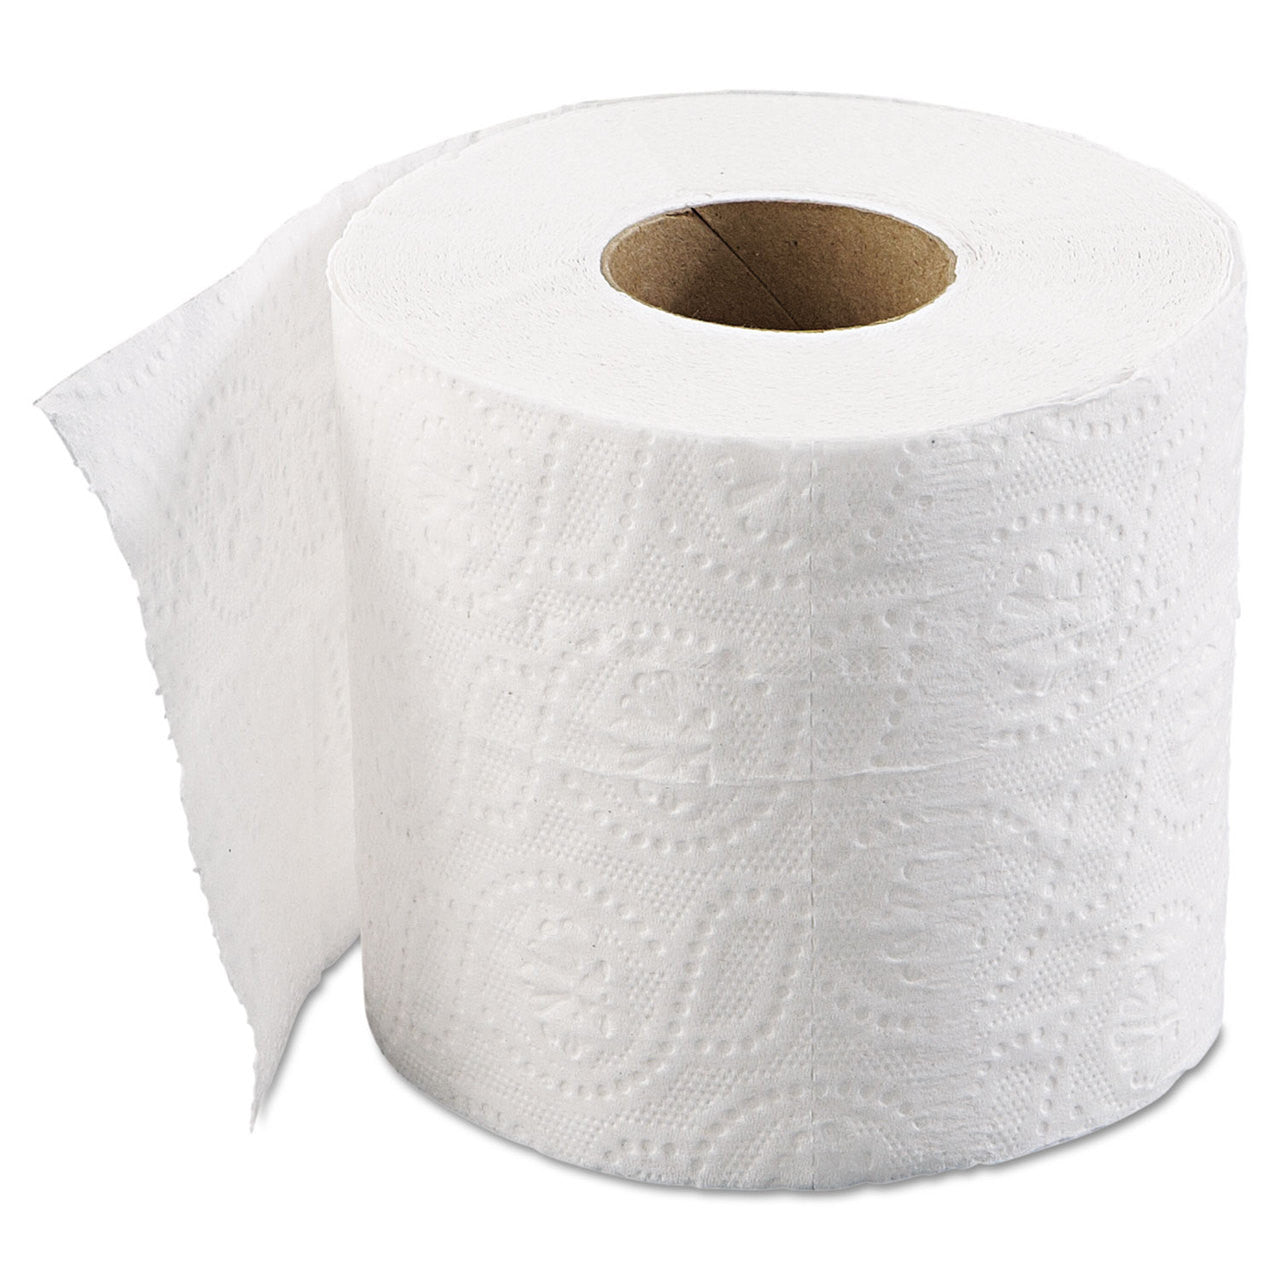 aba>soft toilet paper, brand may vary